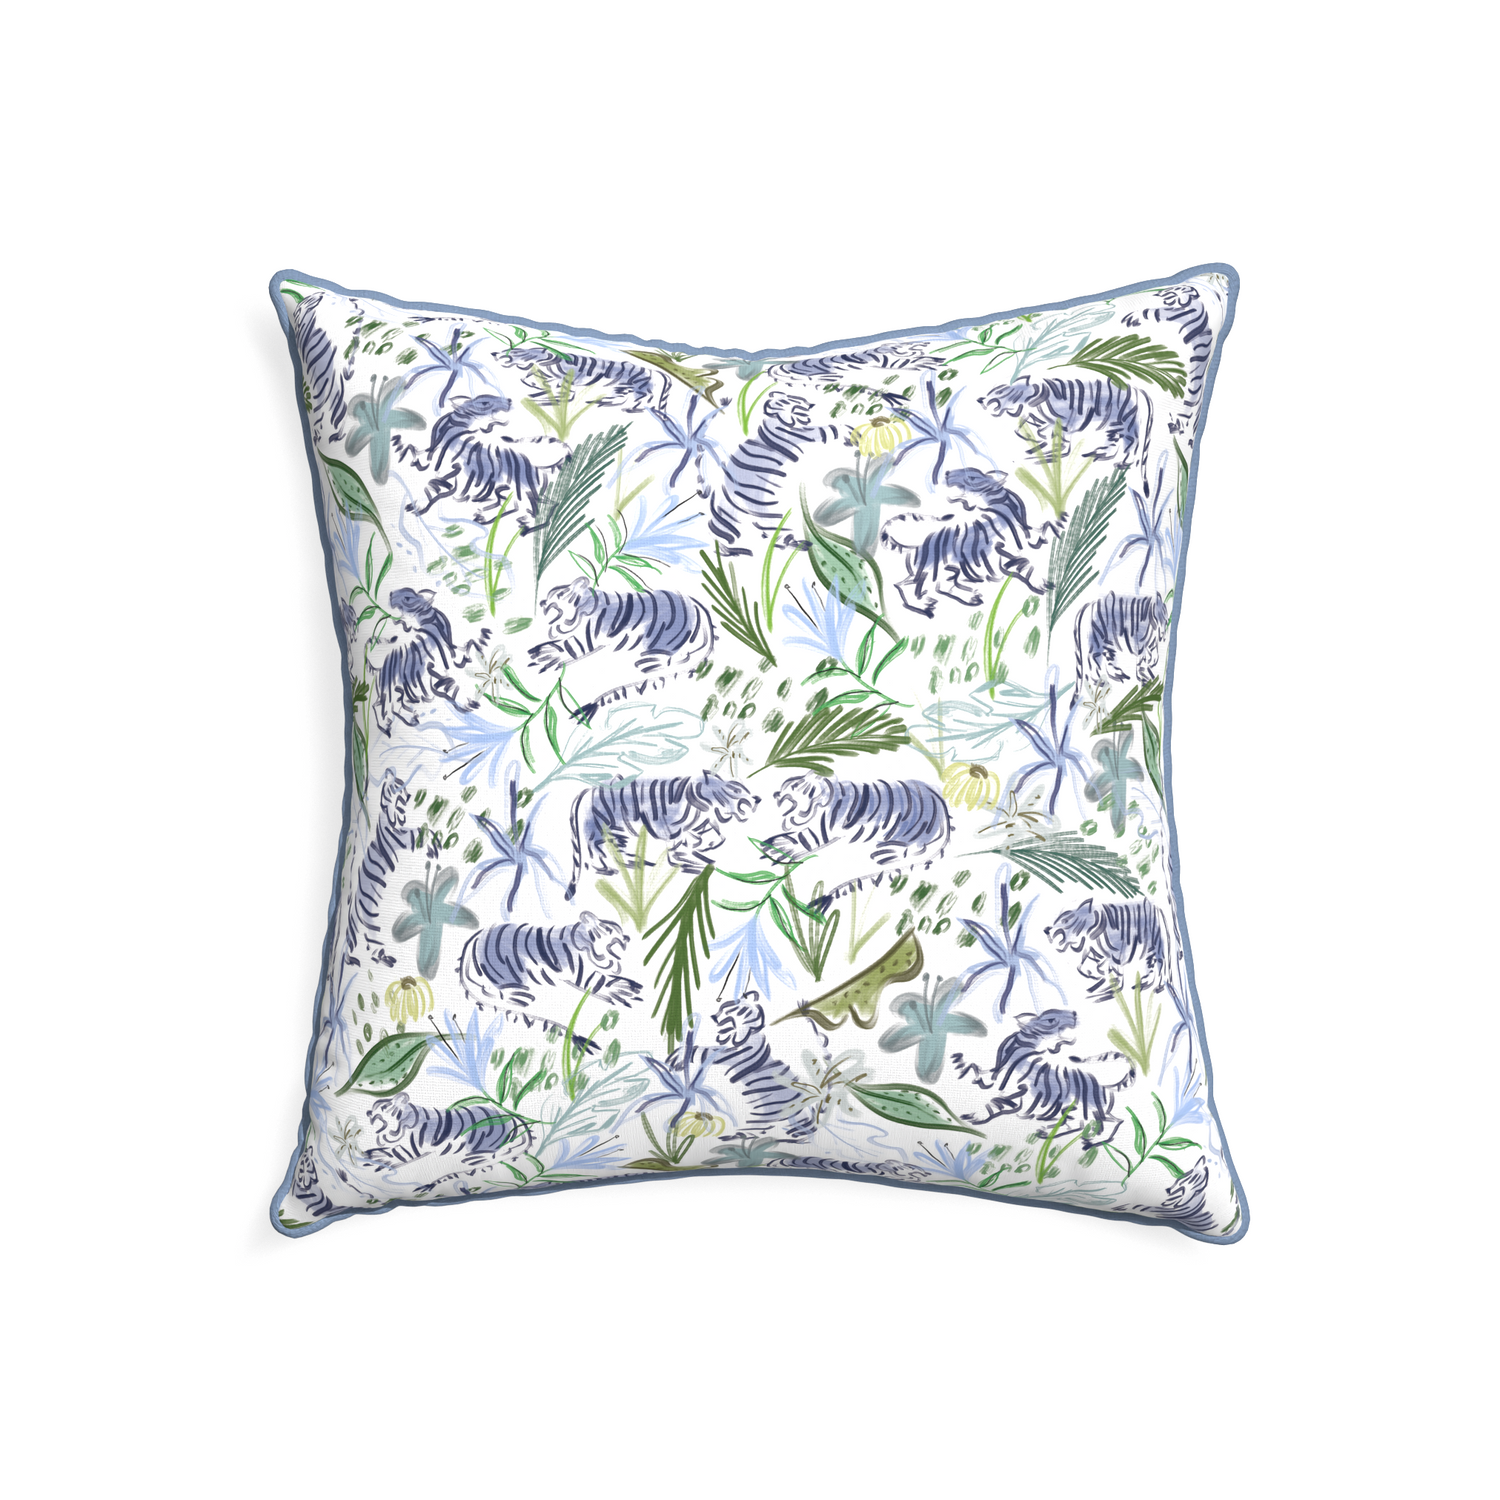 22-square frida green custom green tigerpillow with sky piping on white background